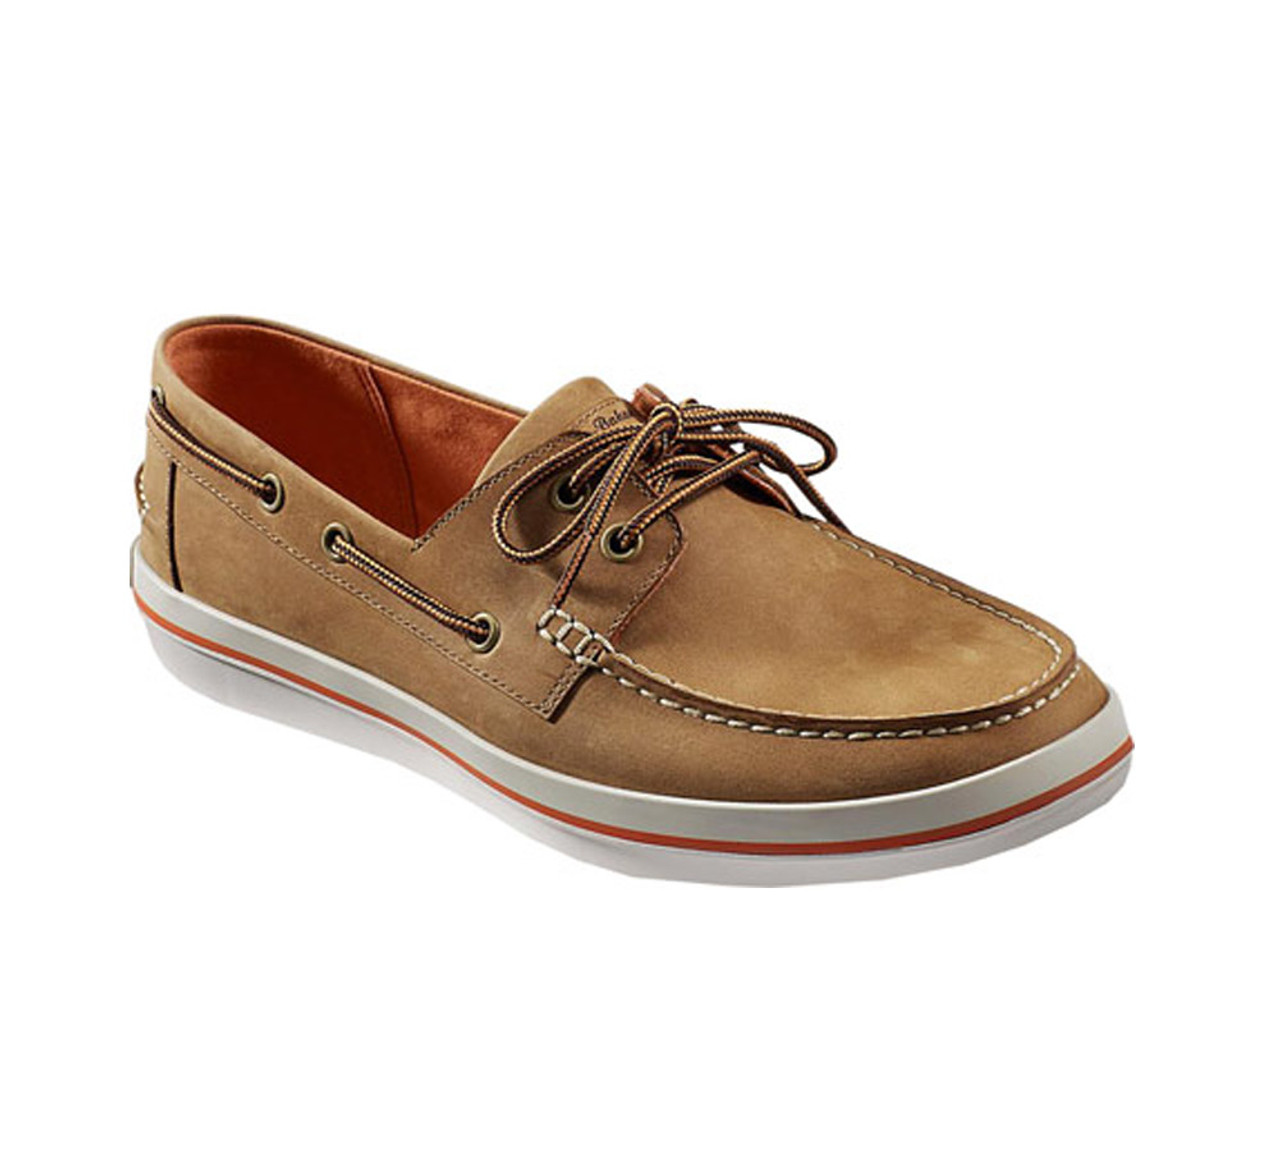 Tommy Bahama Men's Rester Relaxology Boat Shoe - Brown | Discount Tommy ...